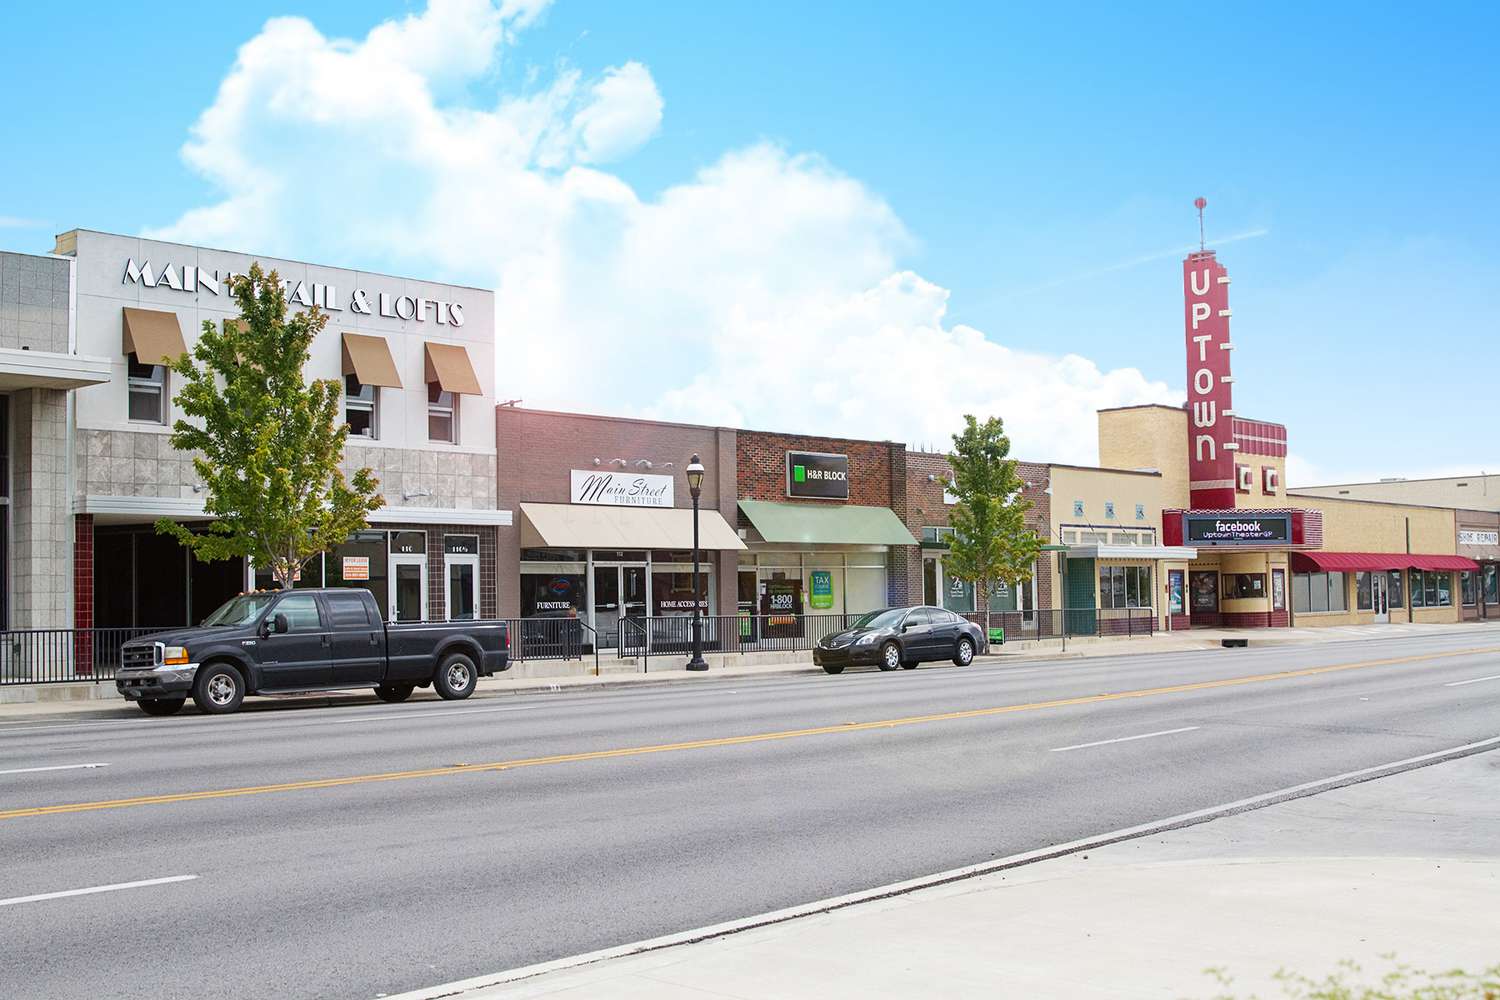 Street view of a small town with various storefronts, including new home builders in Mansfield TX, and a vintage-style theater marquee.